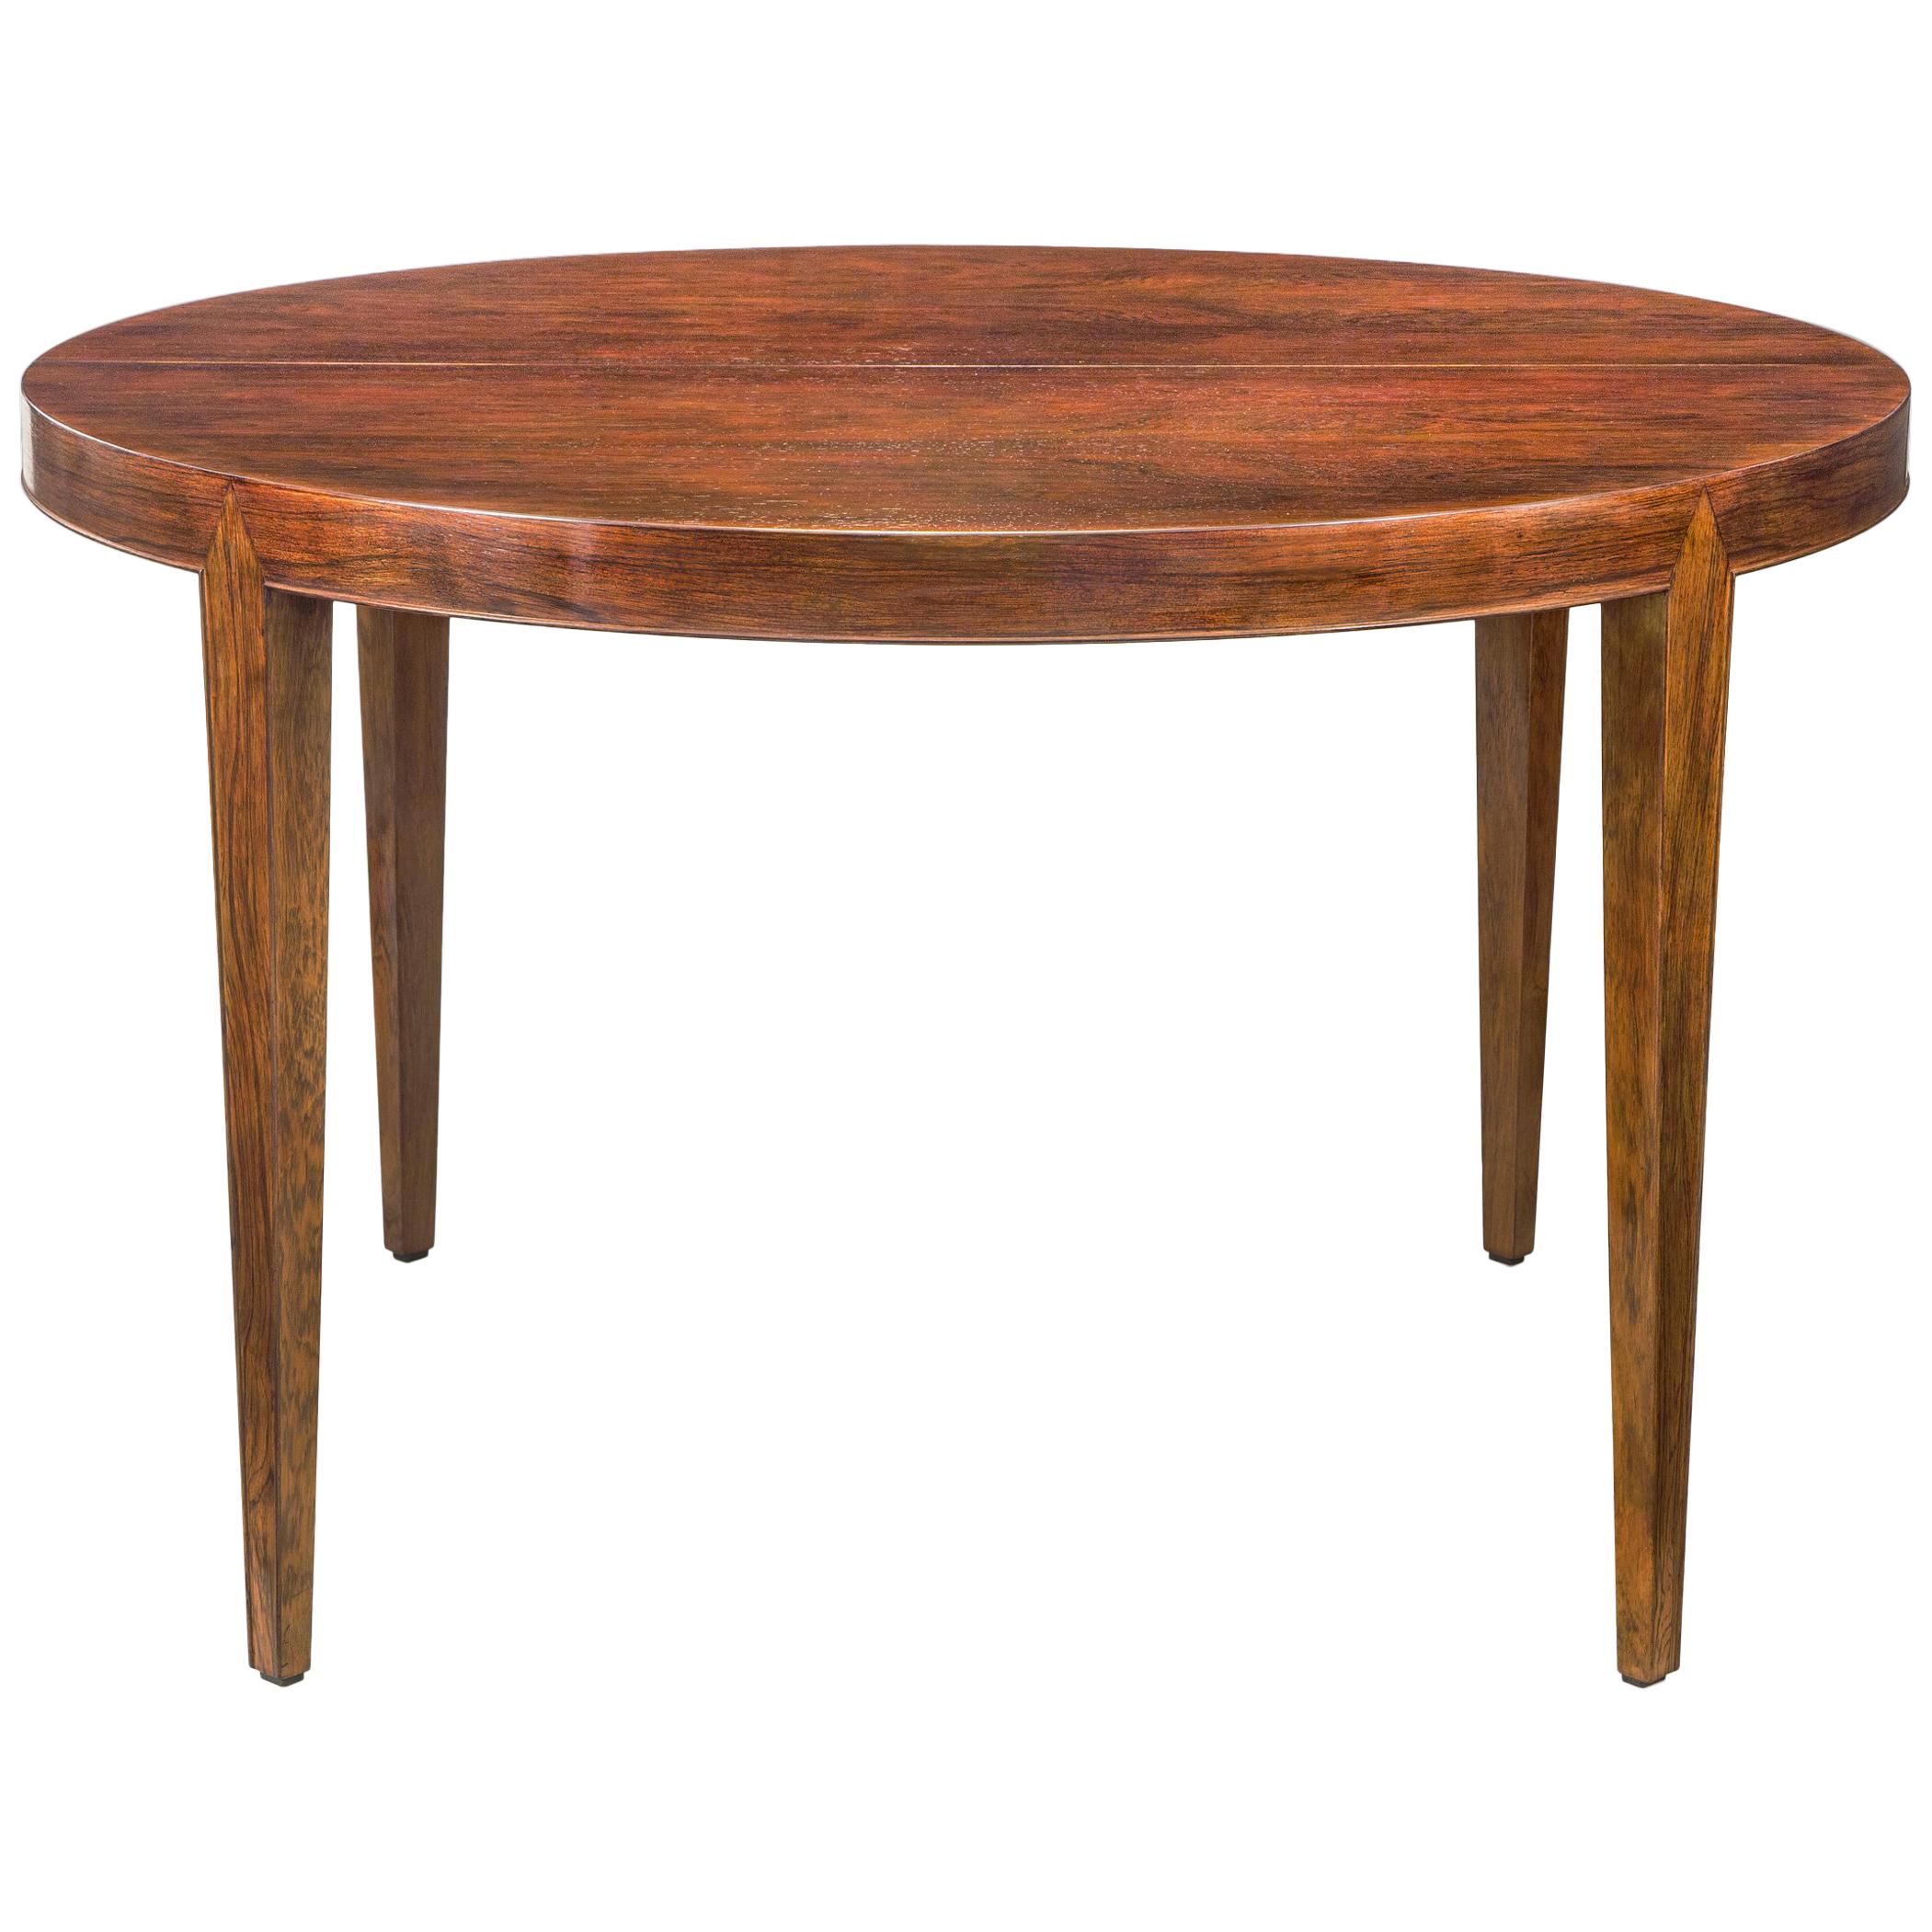 Severin Hansen Danish Rosewood Expandable Center or Dining Table